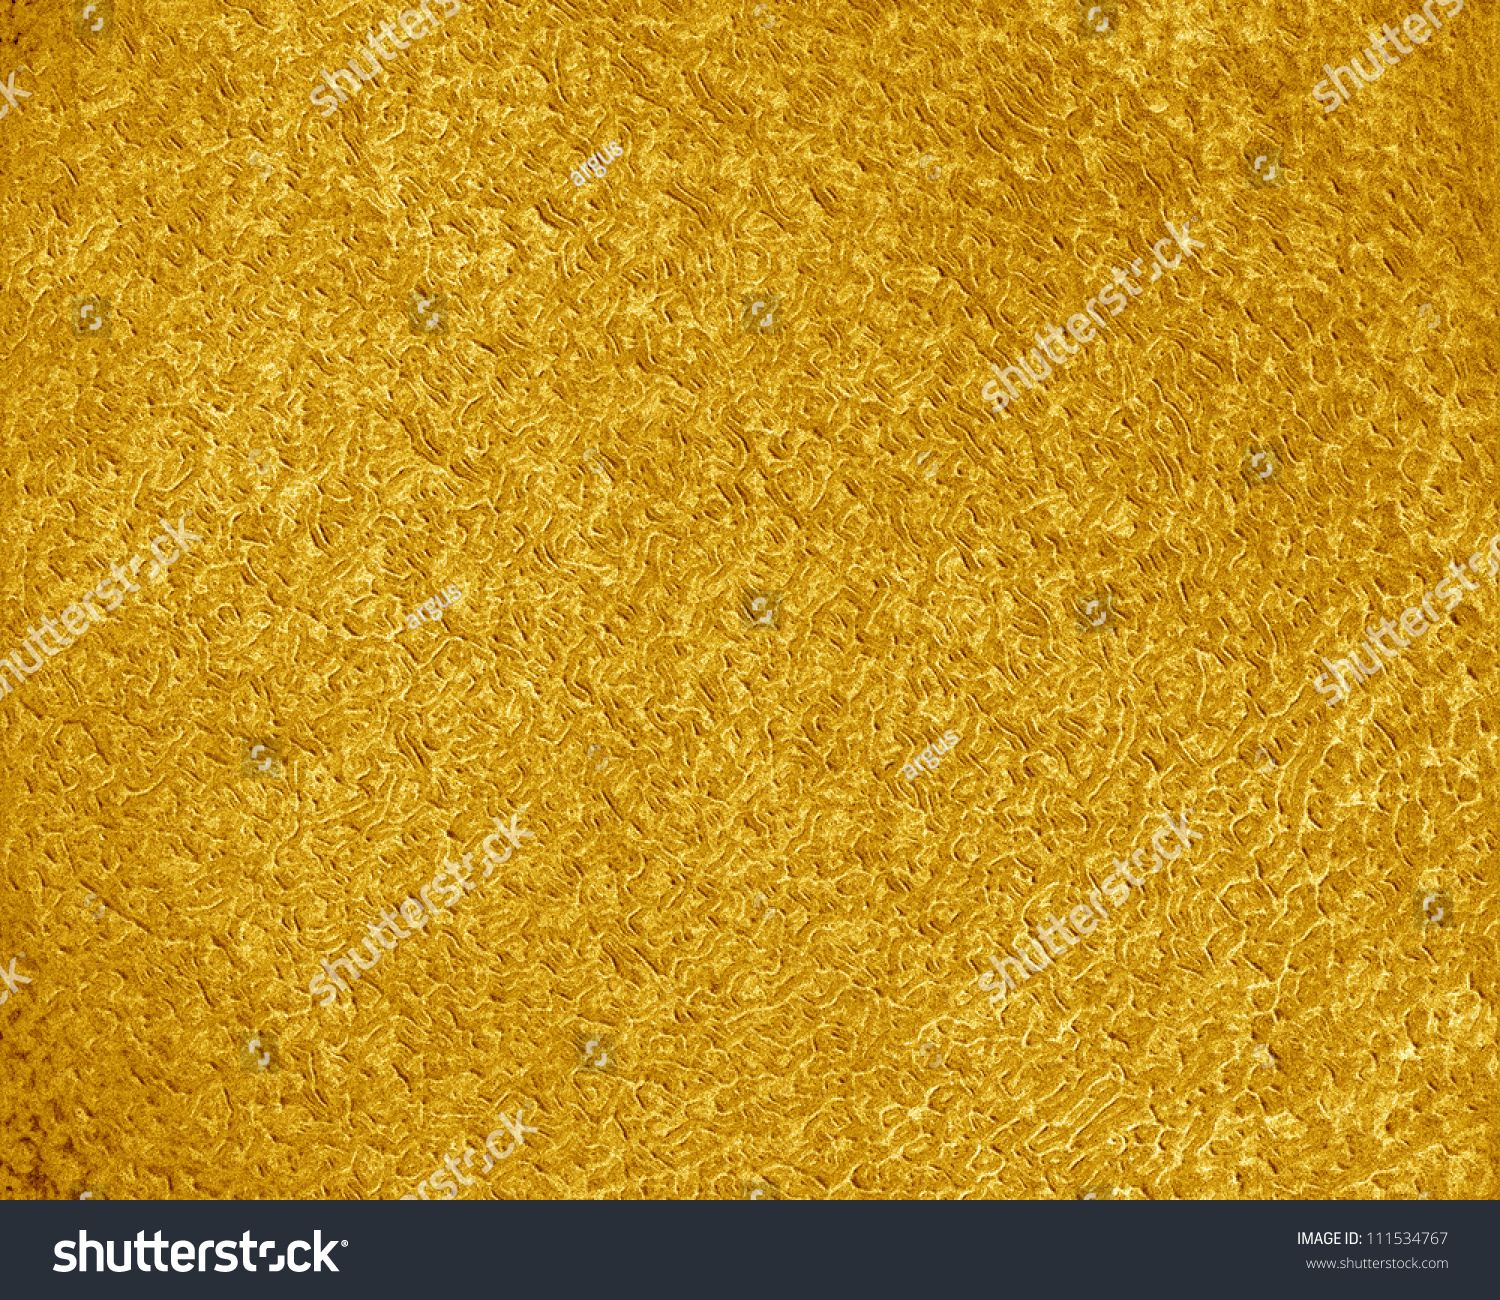 Golden Background Texture With Some Fine Grain Stock Photo 111534767 ...